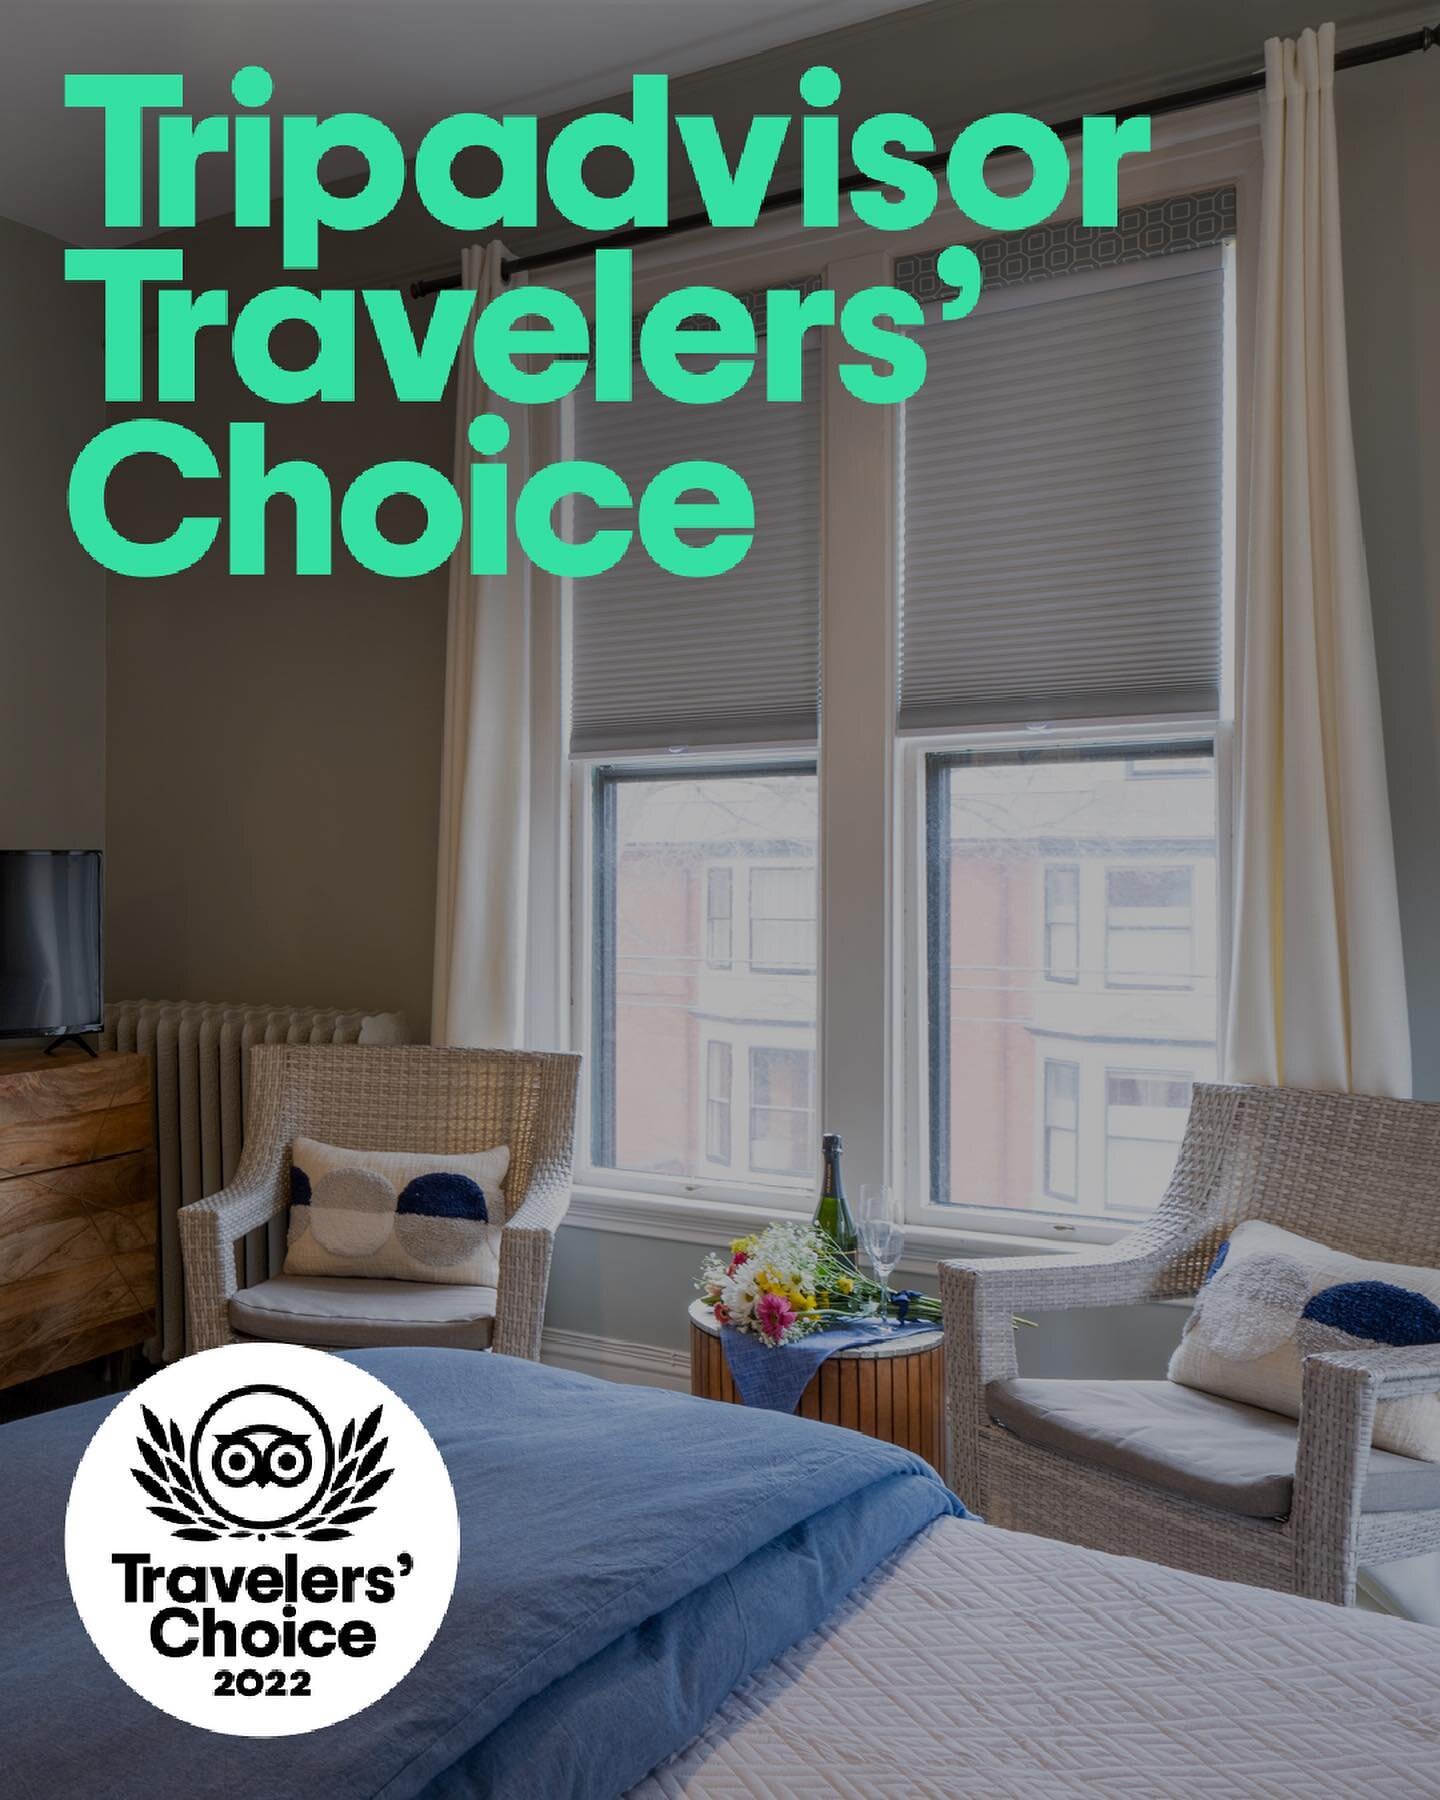 🙌 Once again we&rsquo;re honored our guests have awarded us with the @tripadvisor Travelers&rsquo; Choice award. 🙌 #portlandme #maine #bedandbreakfast